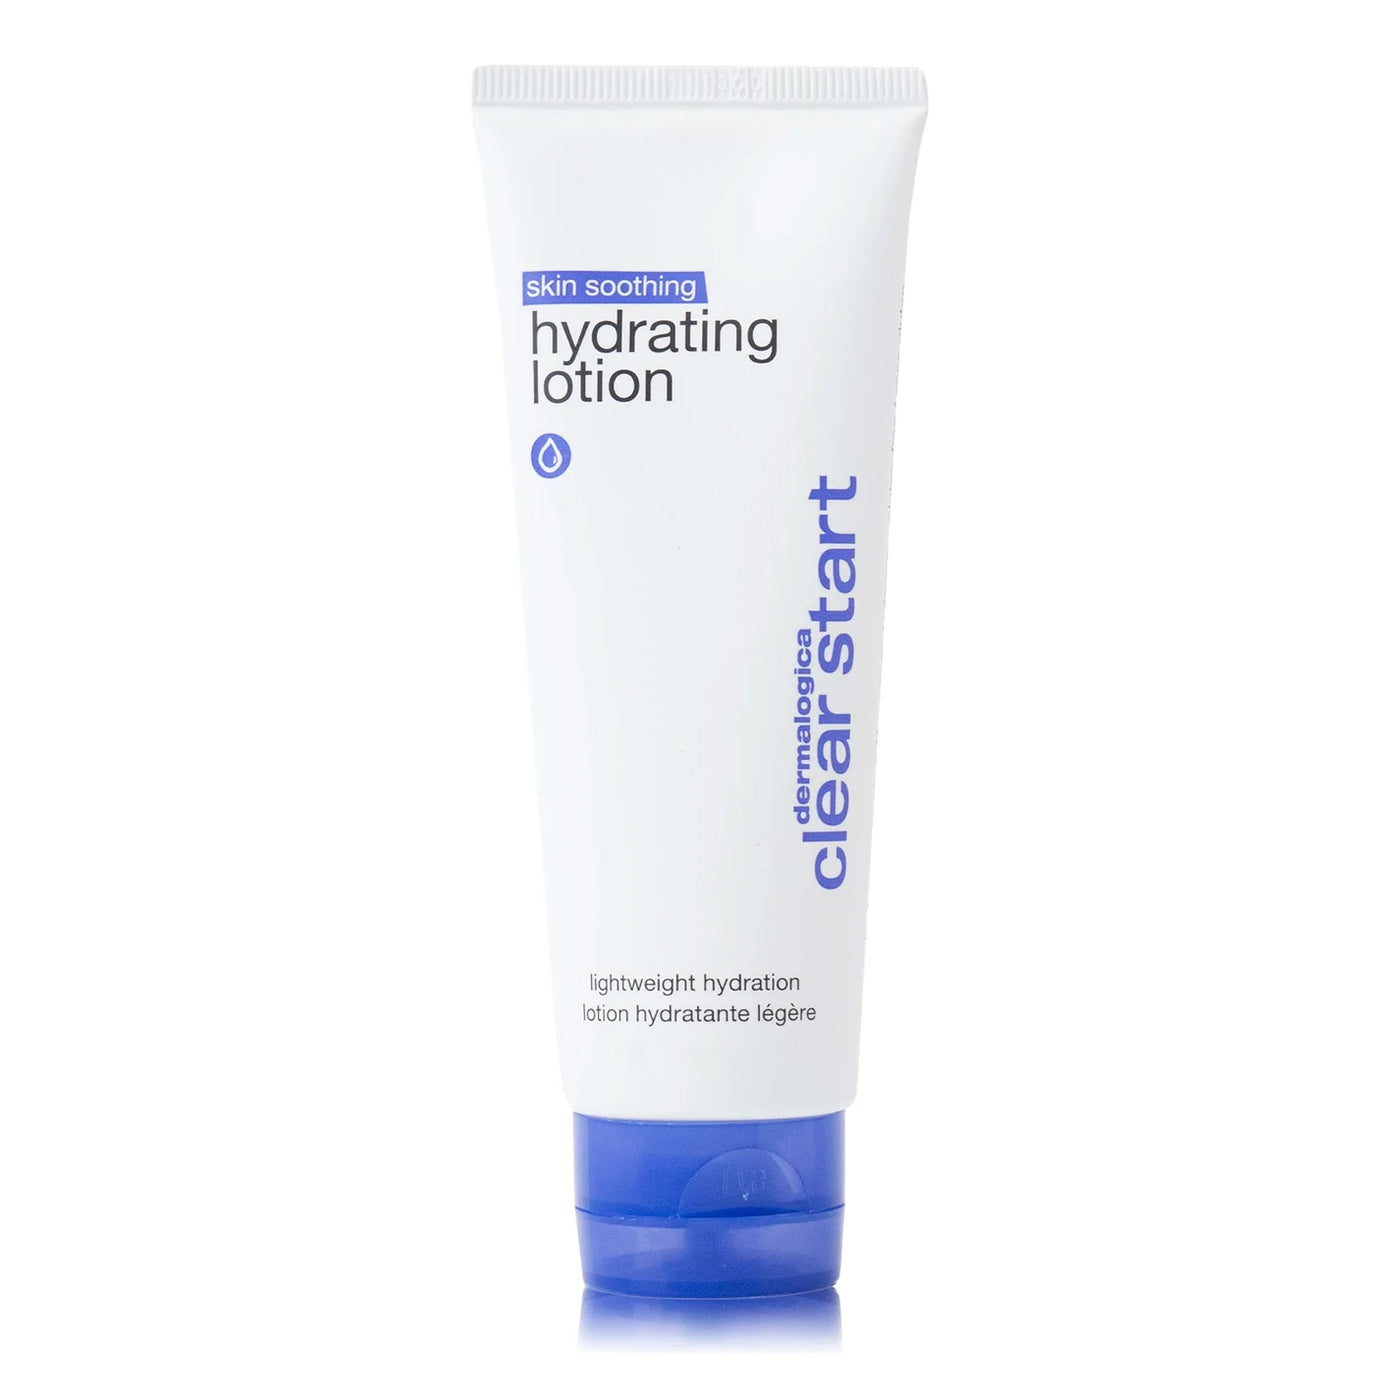 ClearStart Skin Soothing Hydrating Lotion